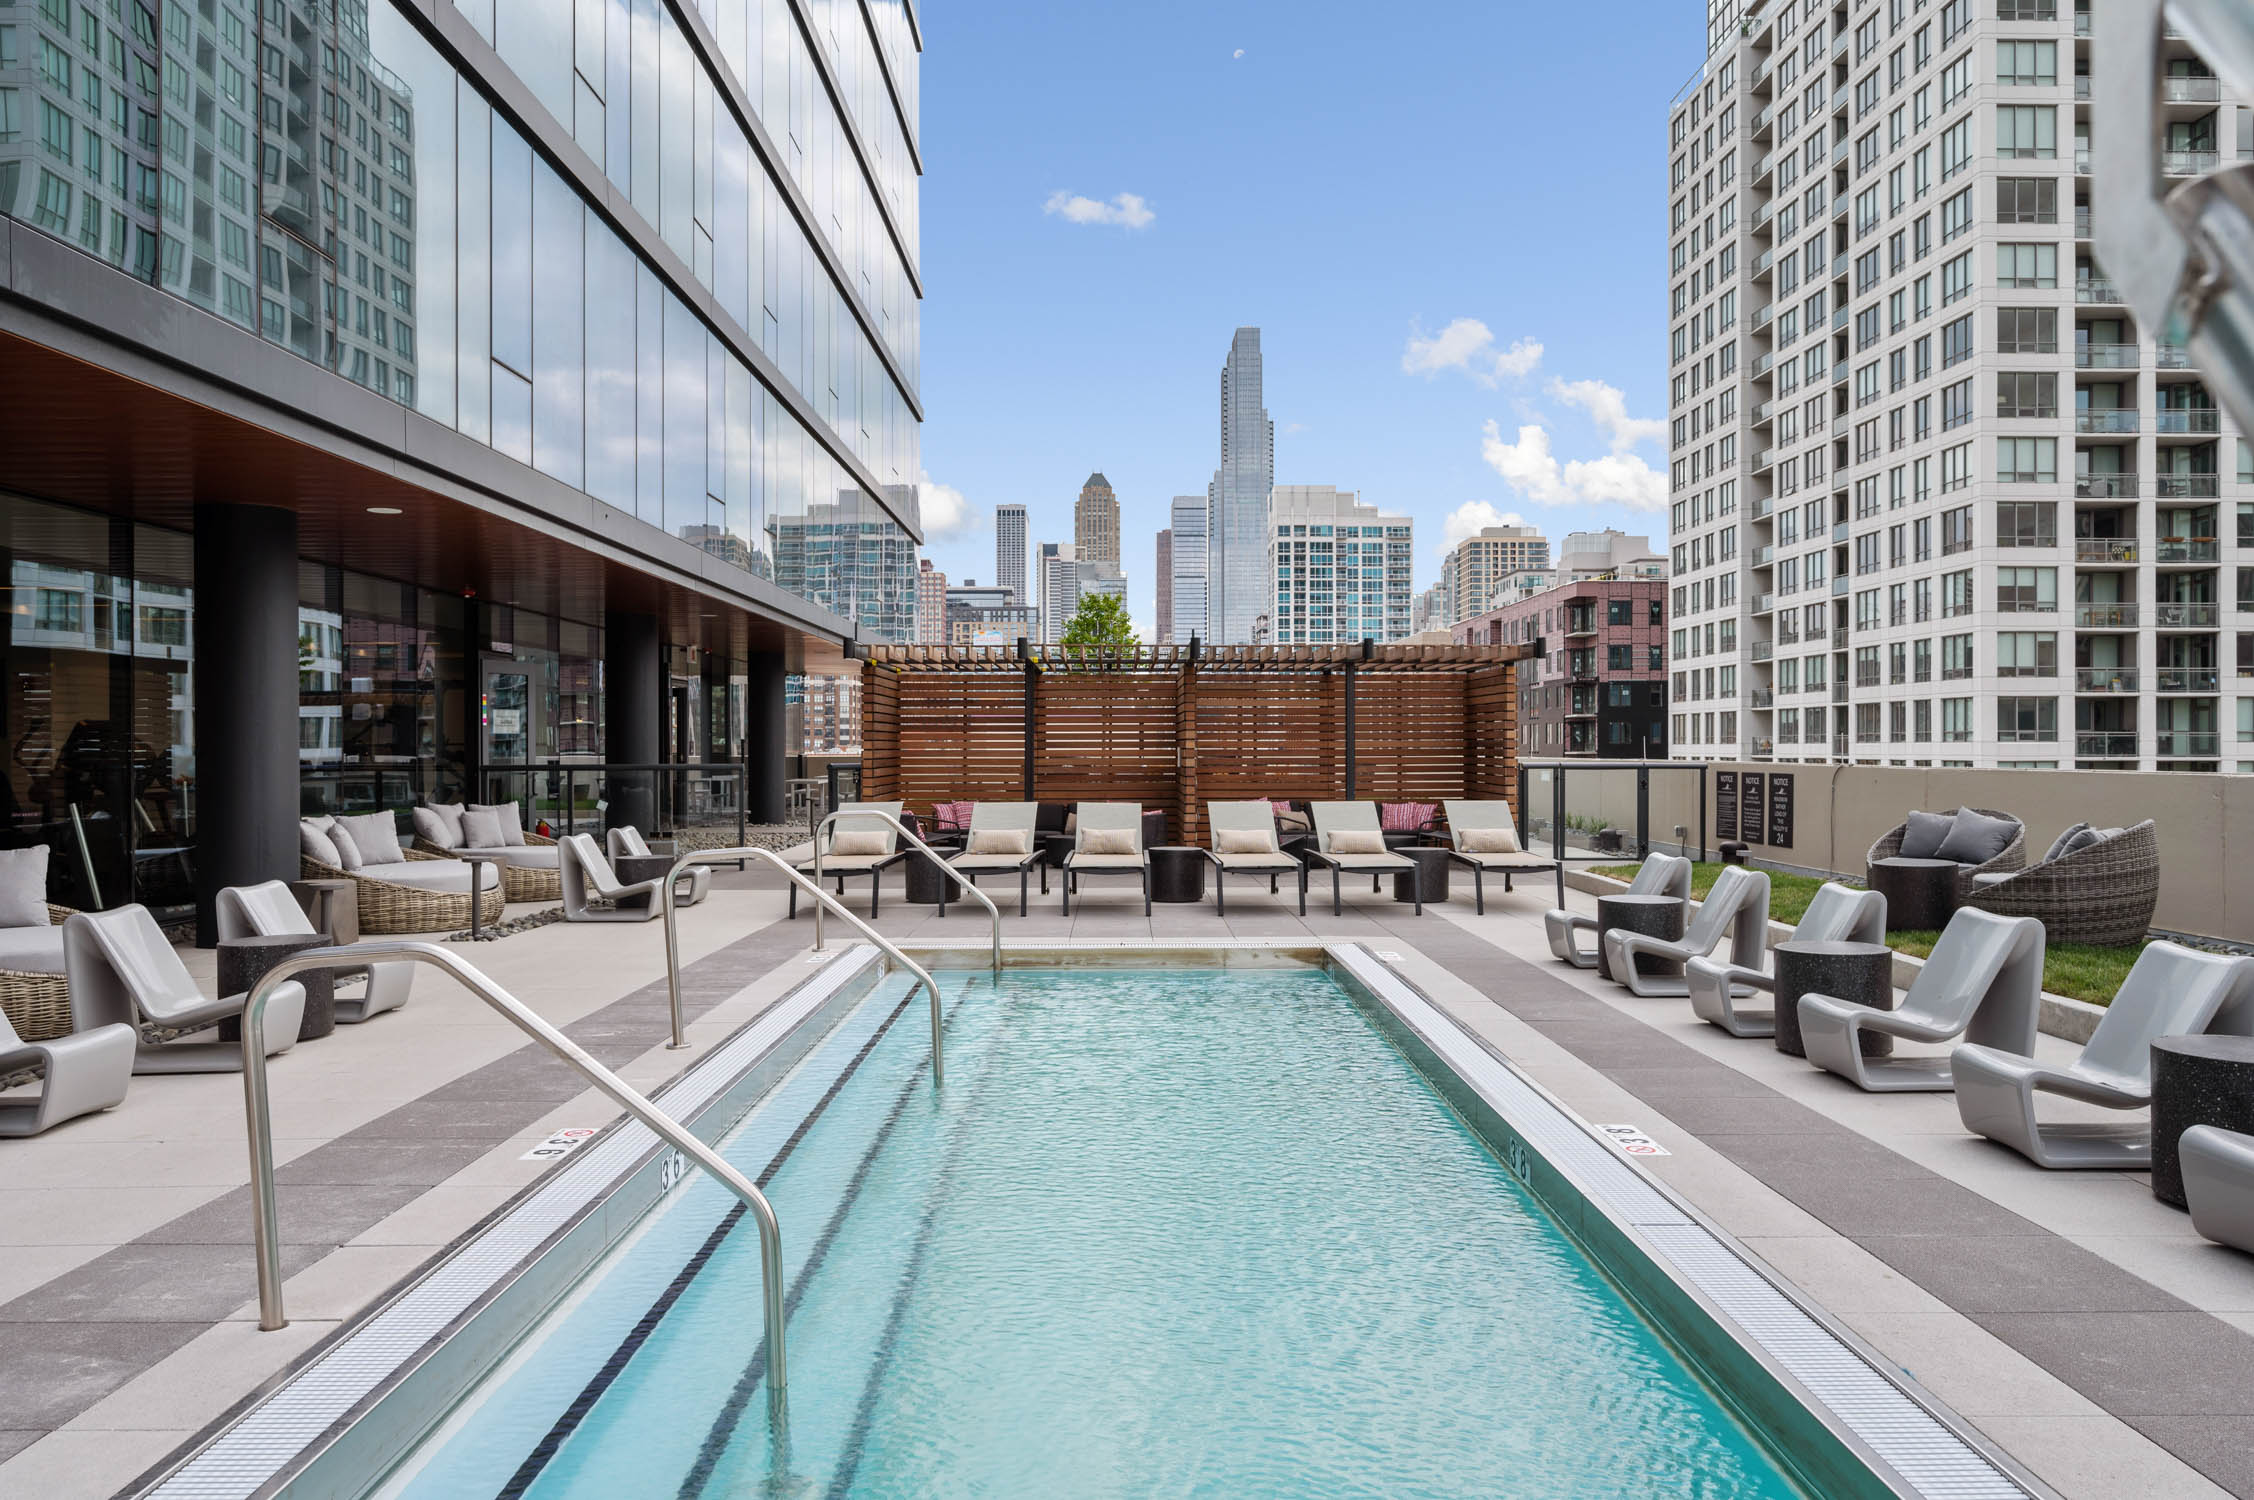 A life of luxury: The 808 managed by Common in River North